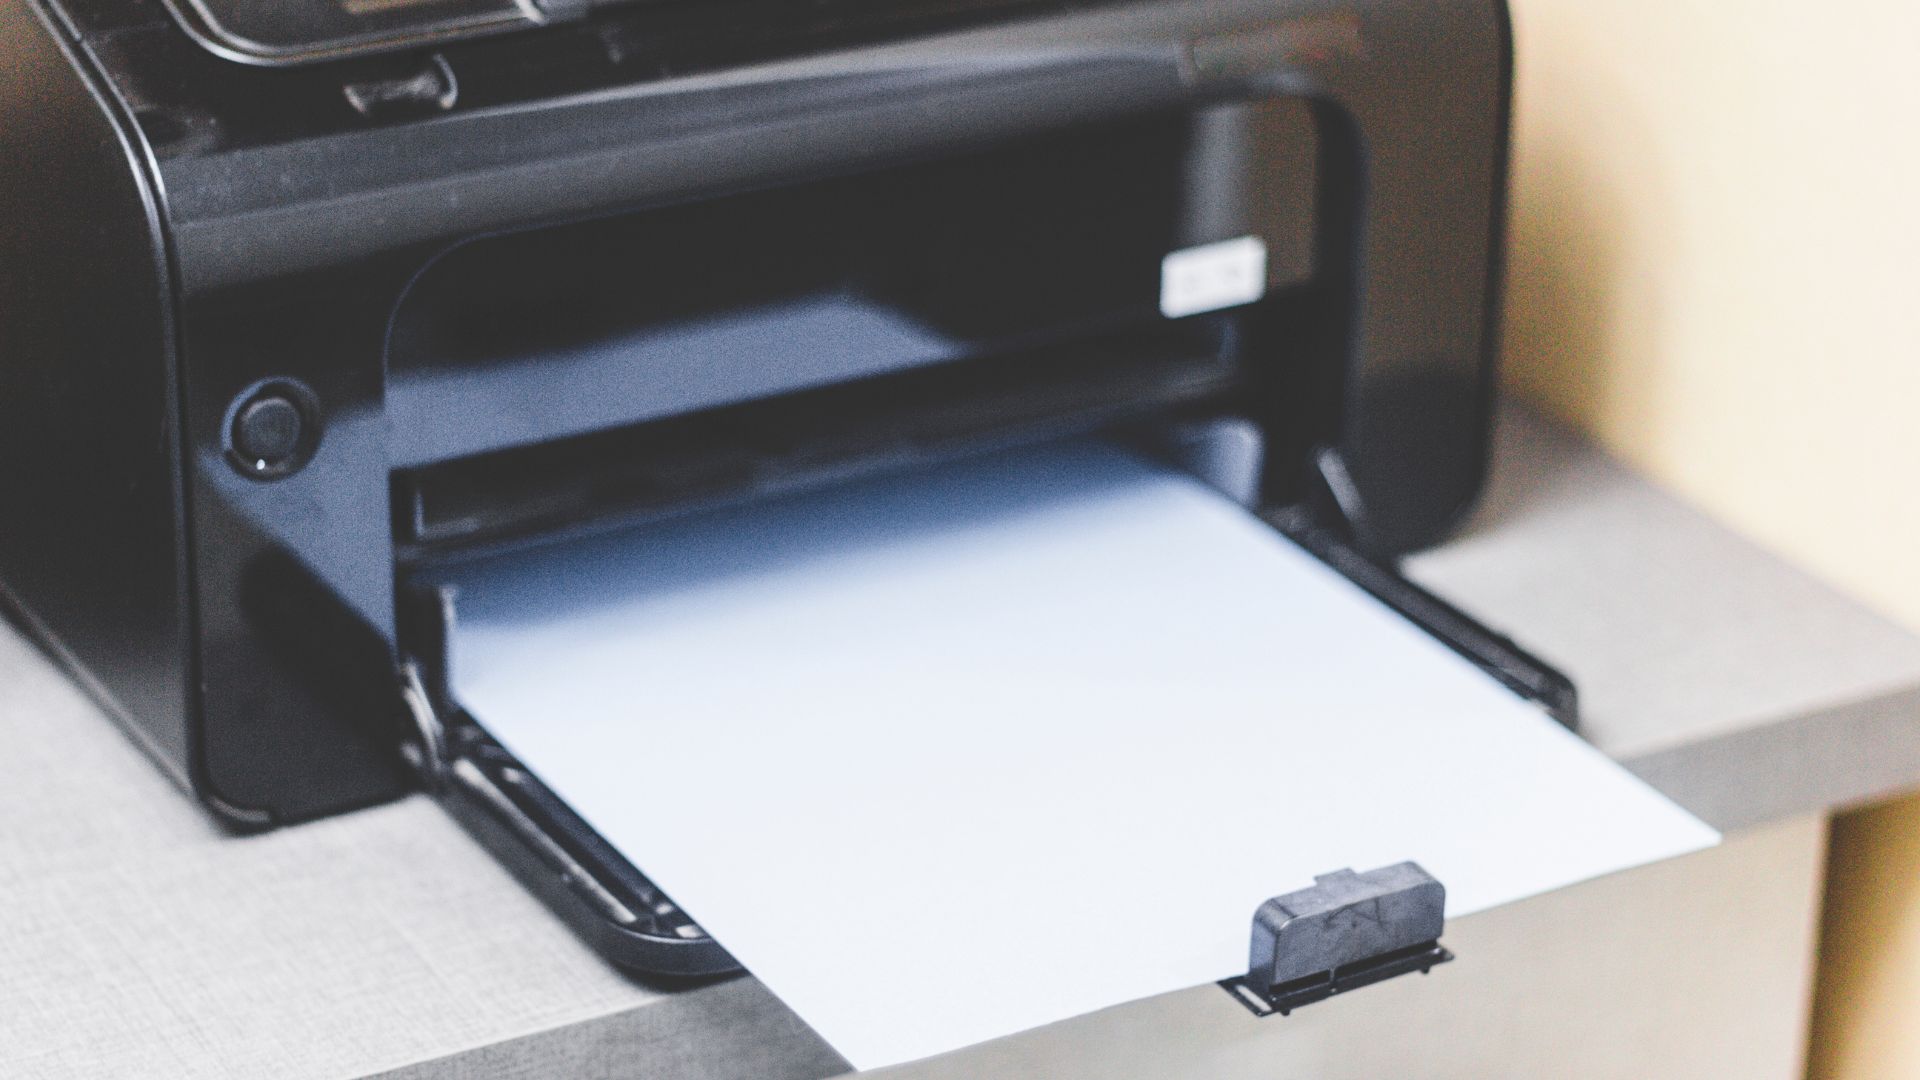 Troubleshot for Printing Blank Pages